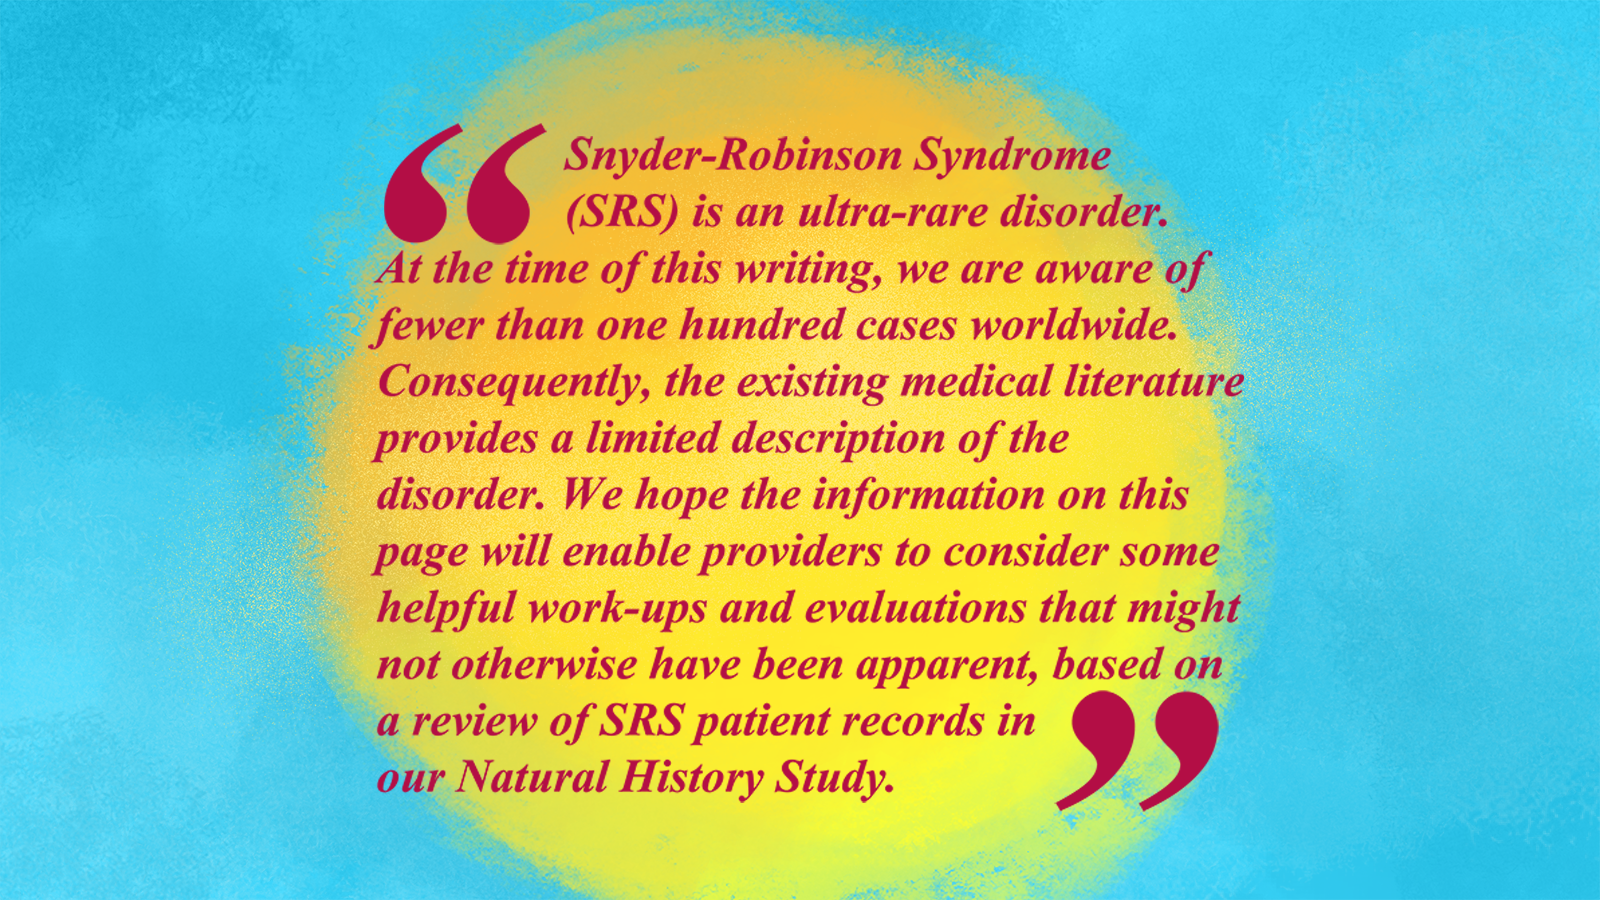 A pull quote on a yellow and blue background that read, “Snyder-Robinson Syndrome (SRS) is an ultra-rare disorder. At the time of this writing, we are aware of fewer than 100 cases worldwide. Consequently, the existing medical literature provides a limited description of the disorder. We hope the information of this page will enable providers to consider some helpful work-ups and evaluations that might not otherwise have been apparent, based on a review of SRS patient records in our Natural History Study.” The caption reads, “We’ve summarized our research so far in a medical management guide.” 